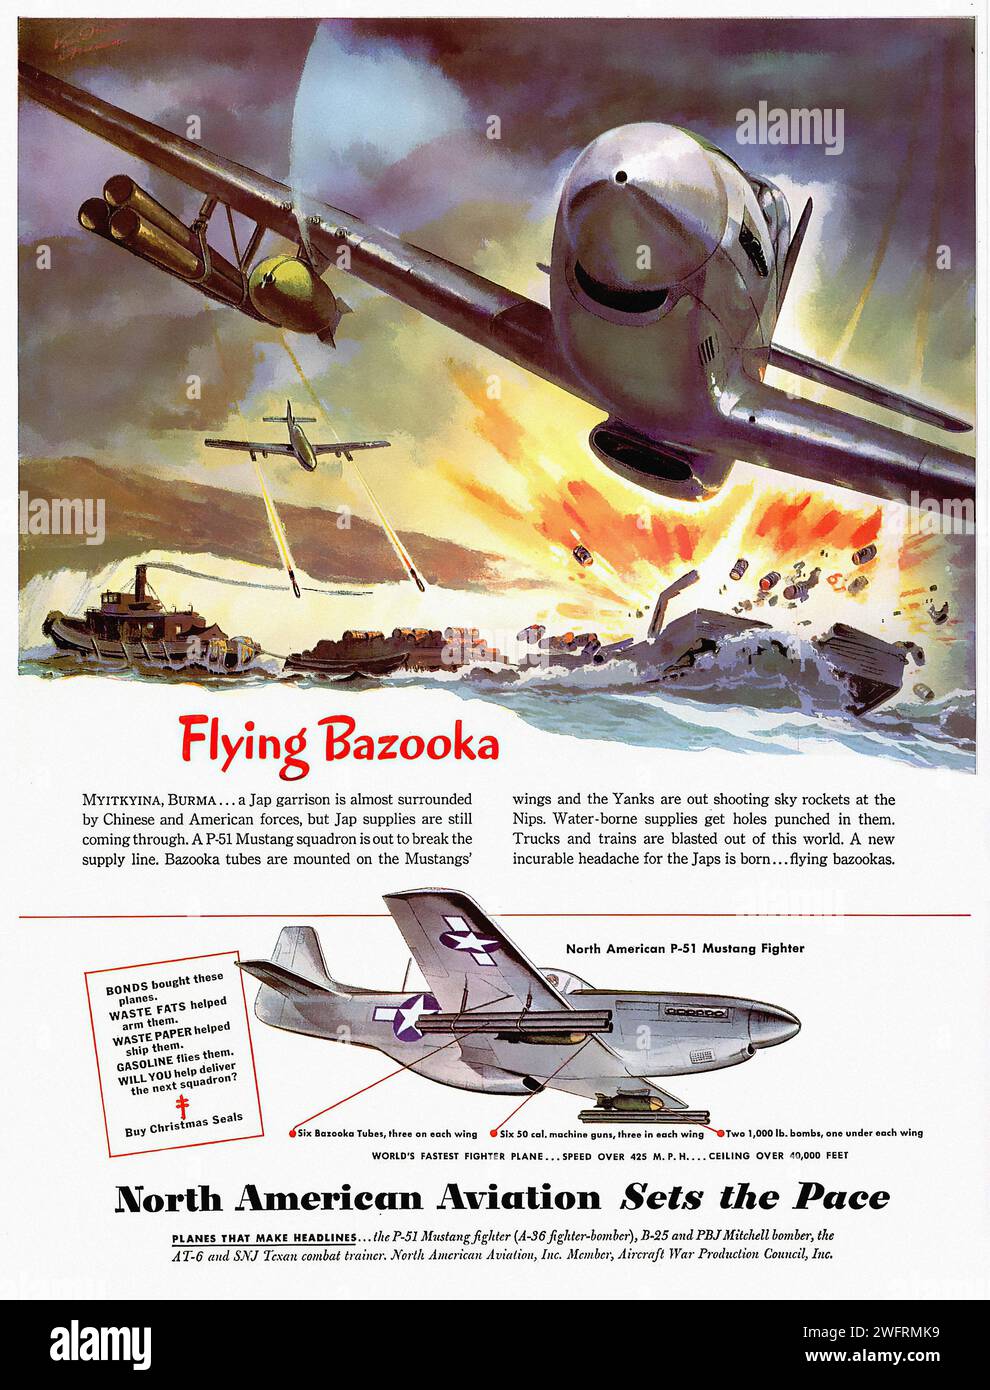 Flying Bazooka  MYITKYINA, BURMA...a Jap garrison is almost surrounded by Chinese and American forces, but Jap supplies are still coming through. A P-51 Mustang squadron is out to break the supply line. Bazooka tubes are mounted on the Mustangs’ wings and the Yanks are out shooting sky rockets at the Nips. Water-borne supplies get holes punched in them. Trucks and trains are blasted out of this world. A new incurable headache for the Japs is born...flying bazookas.  North American P-51 Mustang Fighter  North American Aviation Sets the Pace  PLANTS THAT MAKE HEADLINES...the P-51 Mustang fighter Stock Photo